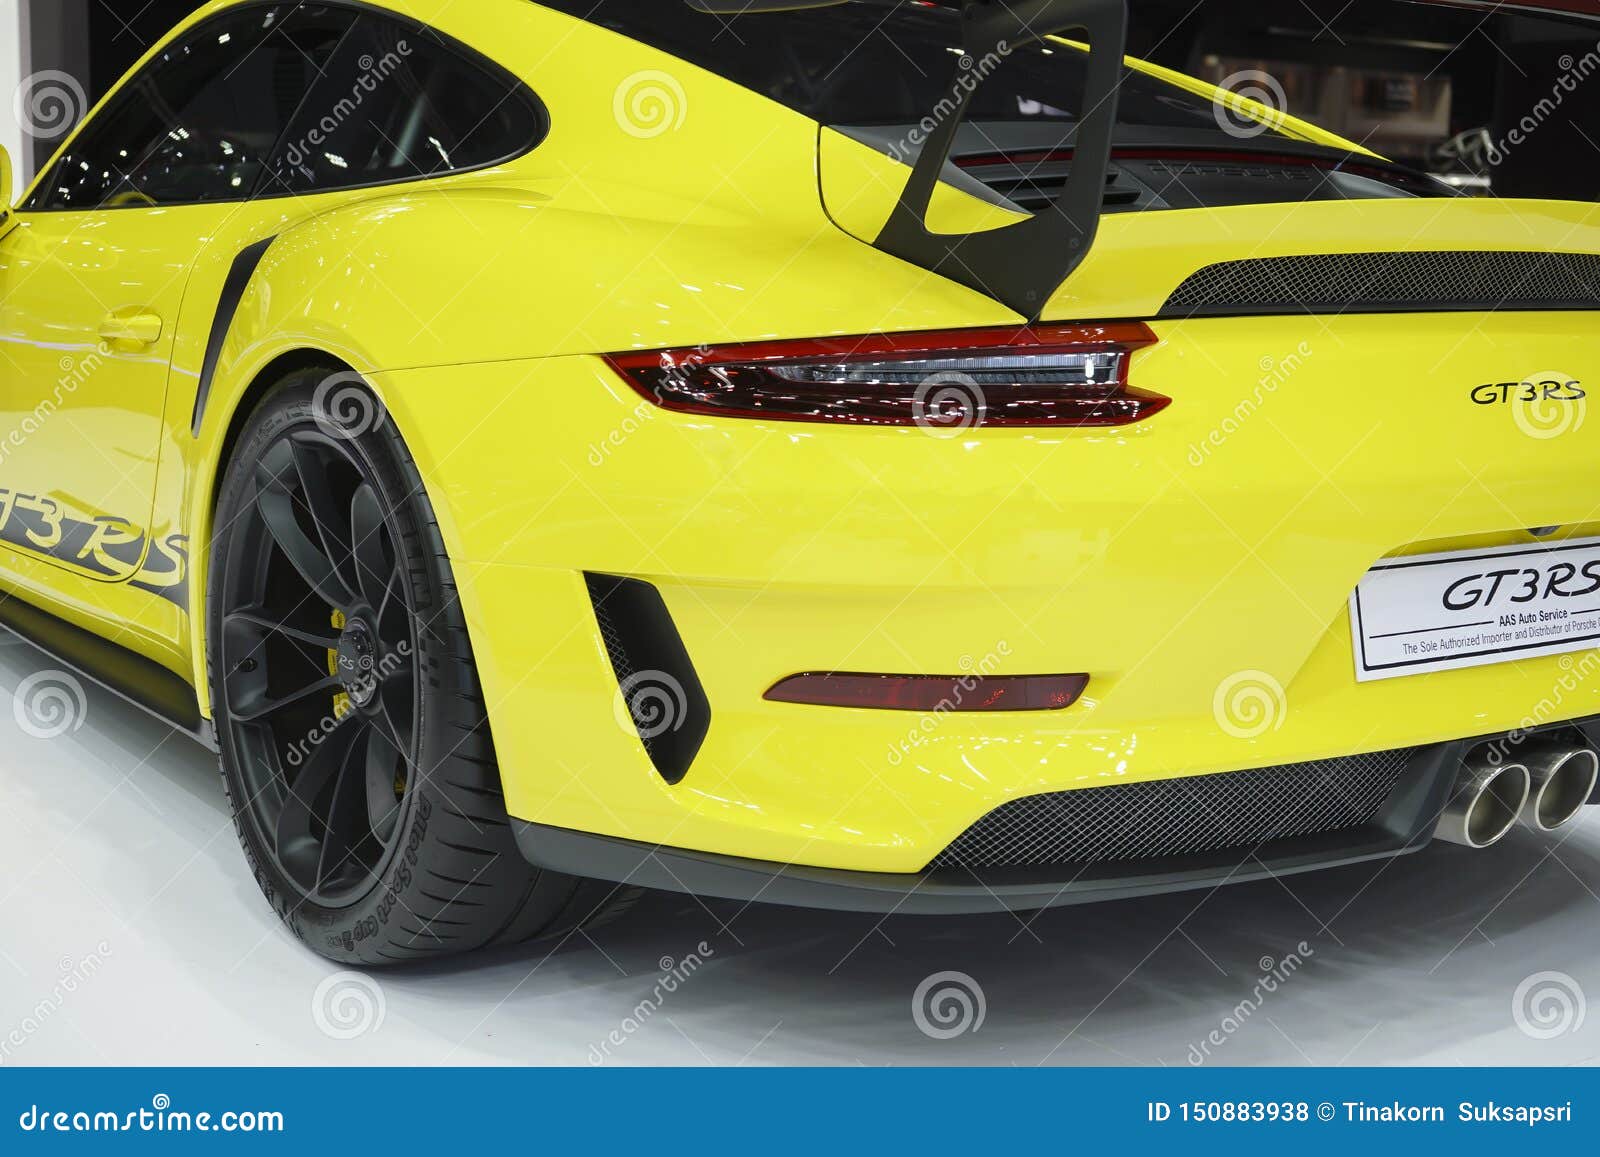 Porsche 911 GT3RS Carrera Weissach Package Supercar Yellow Color on Display  40th Bangkok International Motor Show 2019 Editorial Stock Photo - Image of  automotive, executive: 150883938